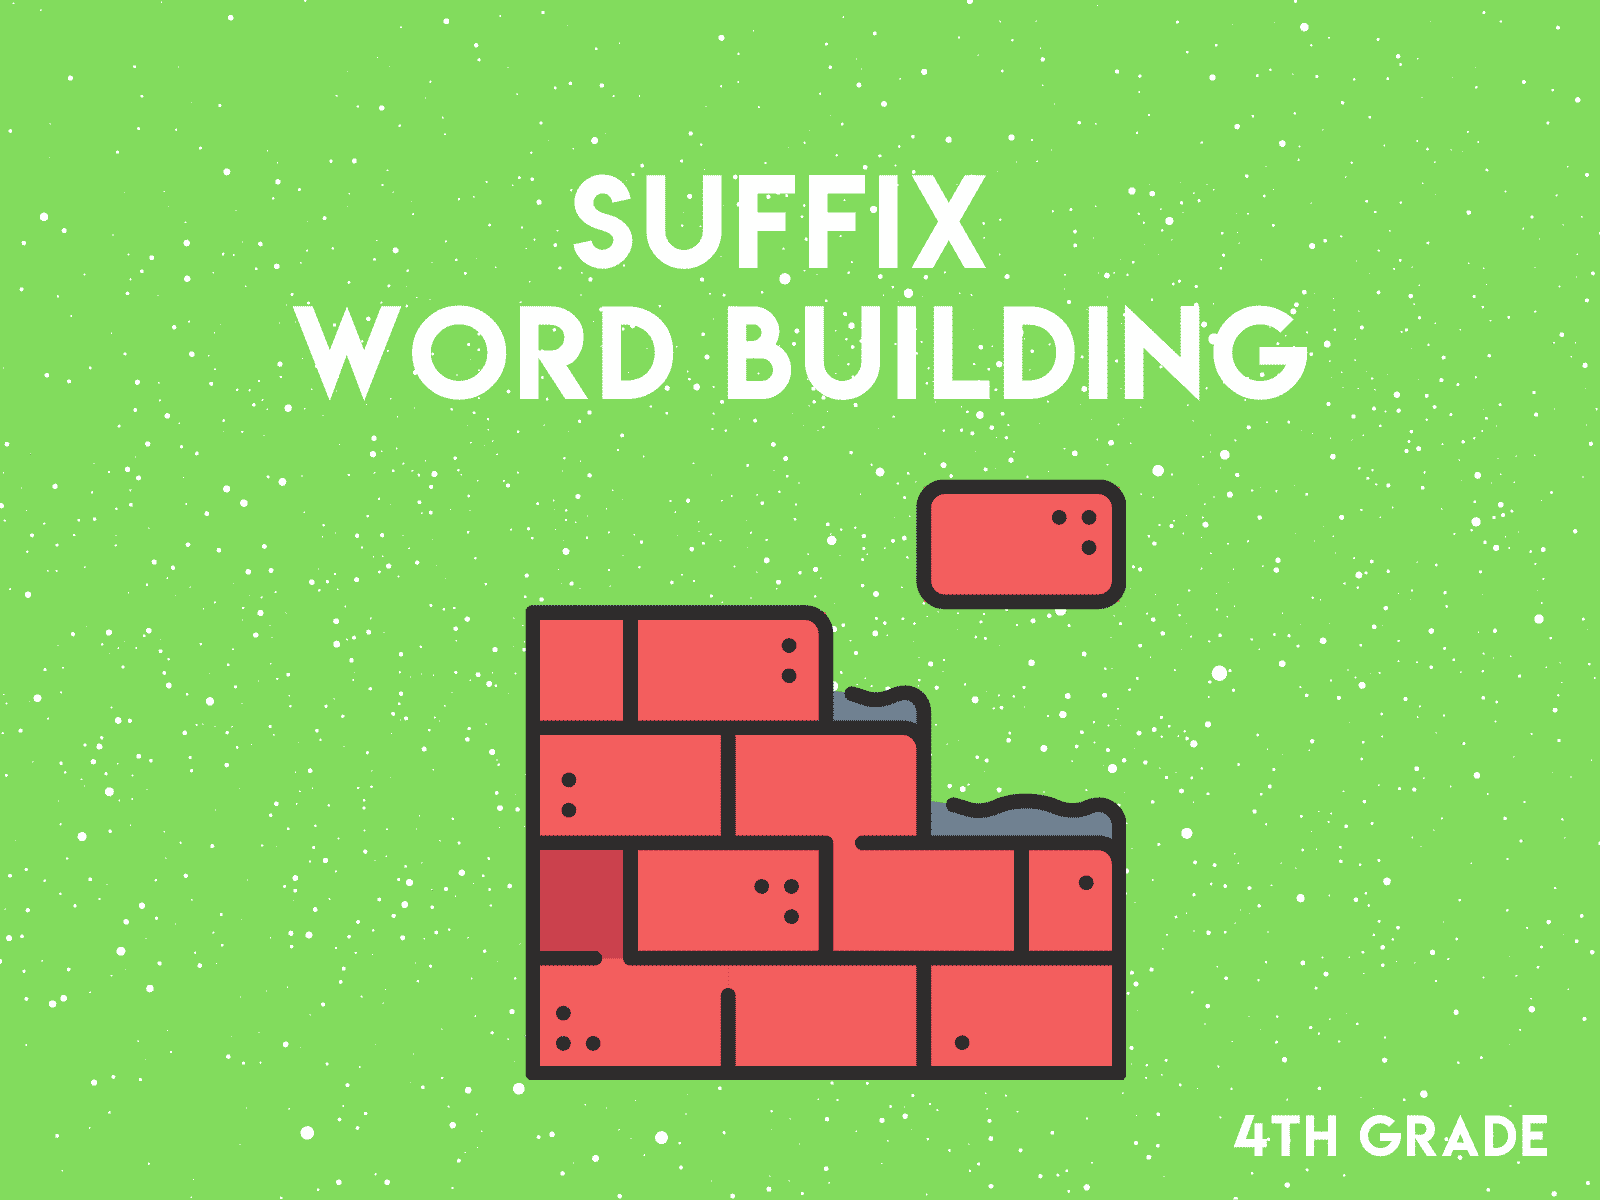 Practice building new words with this suffix word building activity for fourth grade.